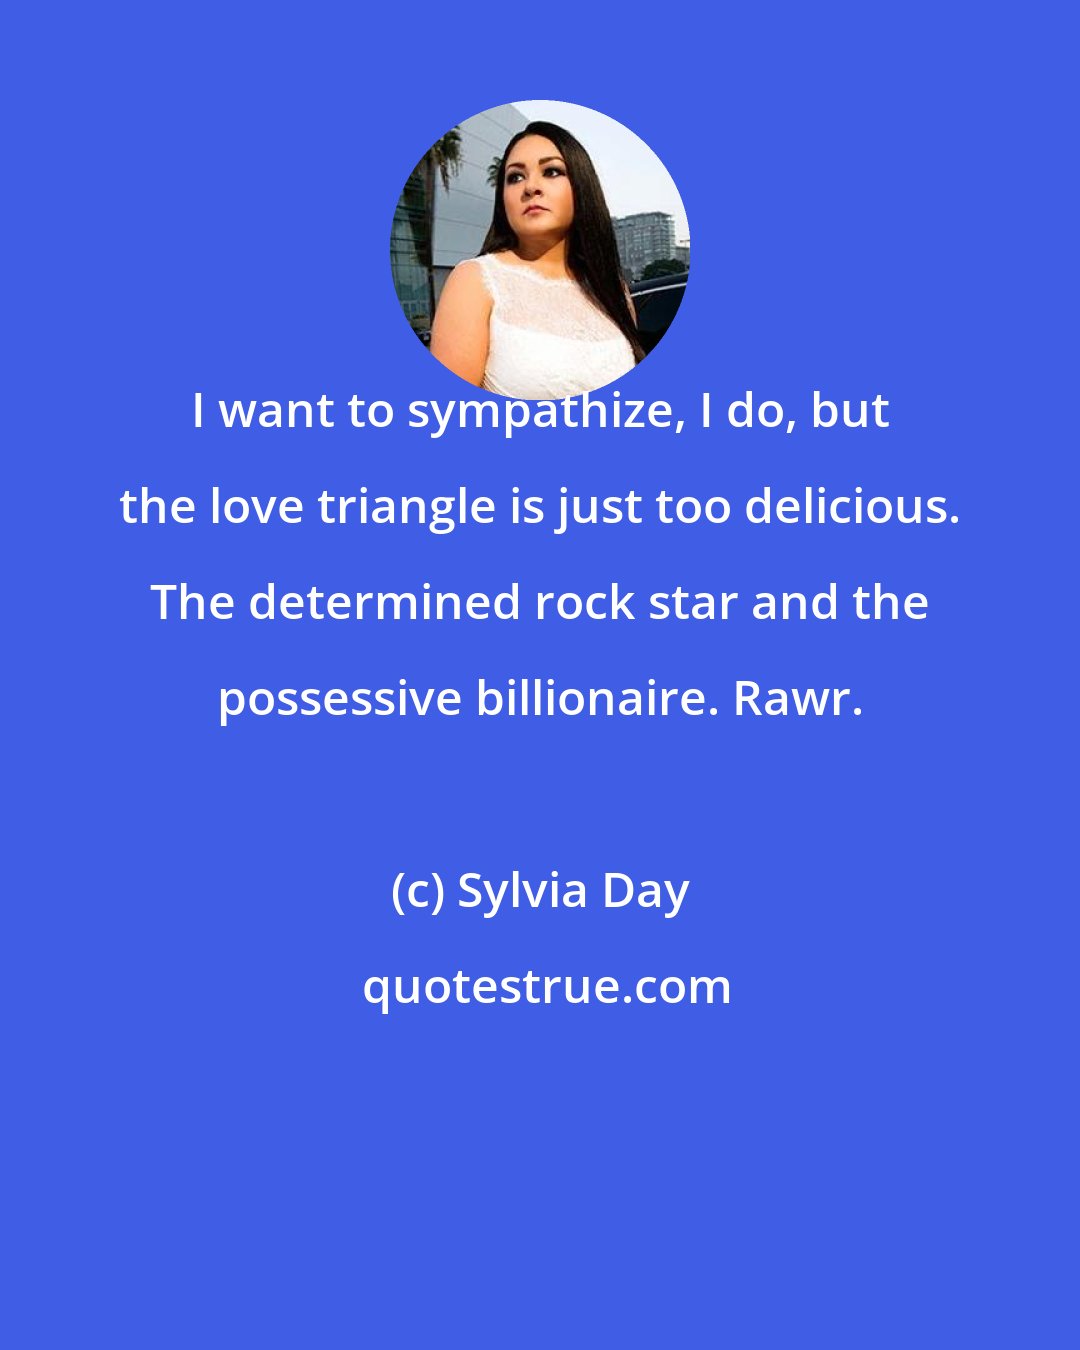 Sylvia Day: I want to sympathize, I do, but the love triangle is just too delicious. The determined rock star and the possessive billionaire. Rawr.